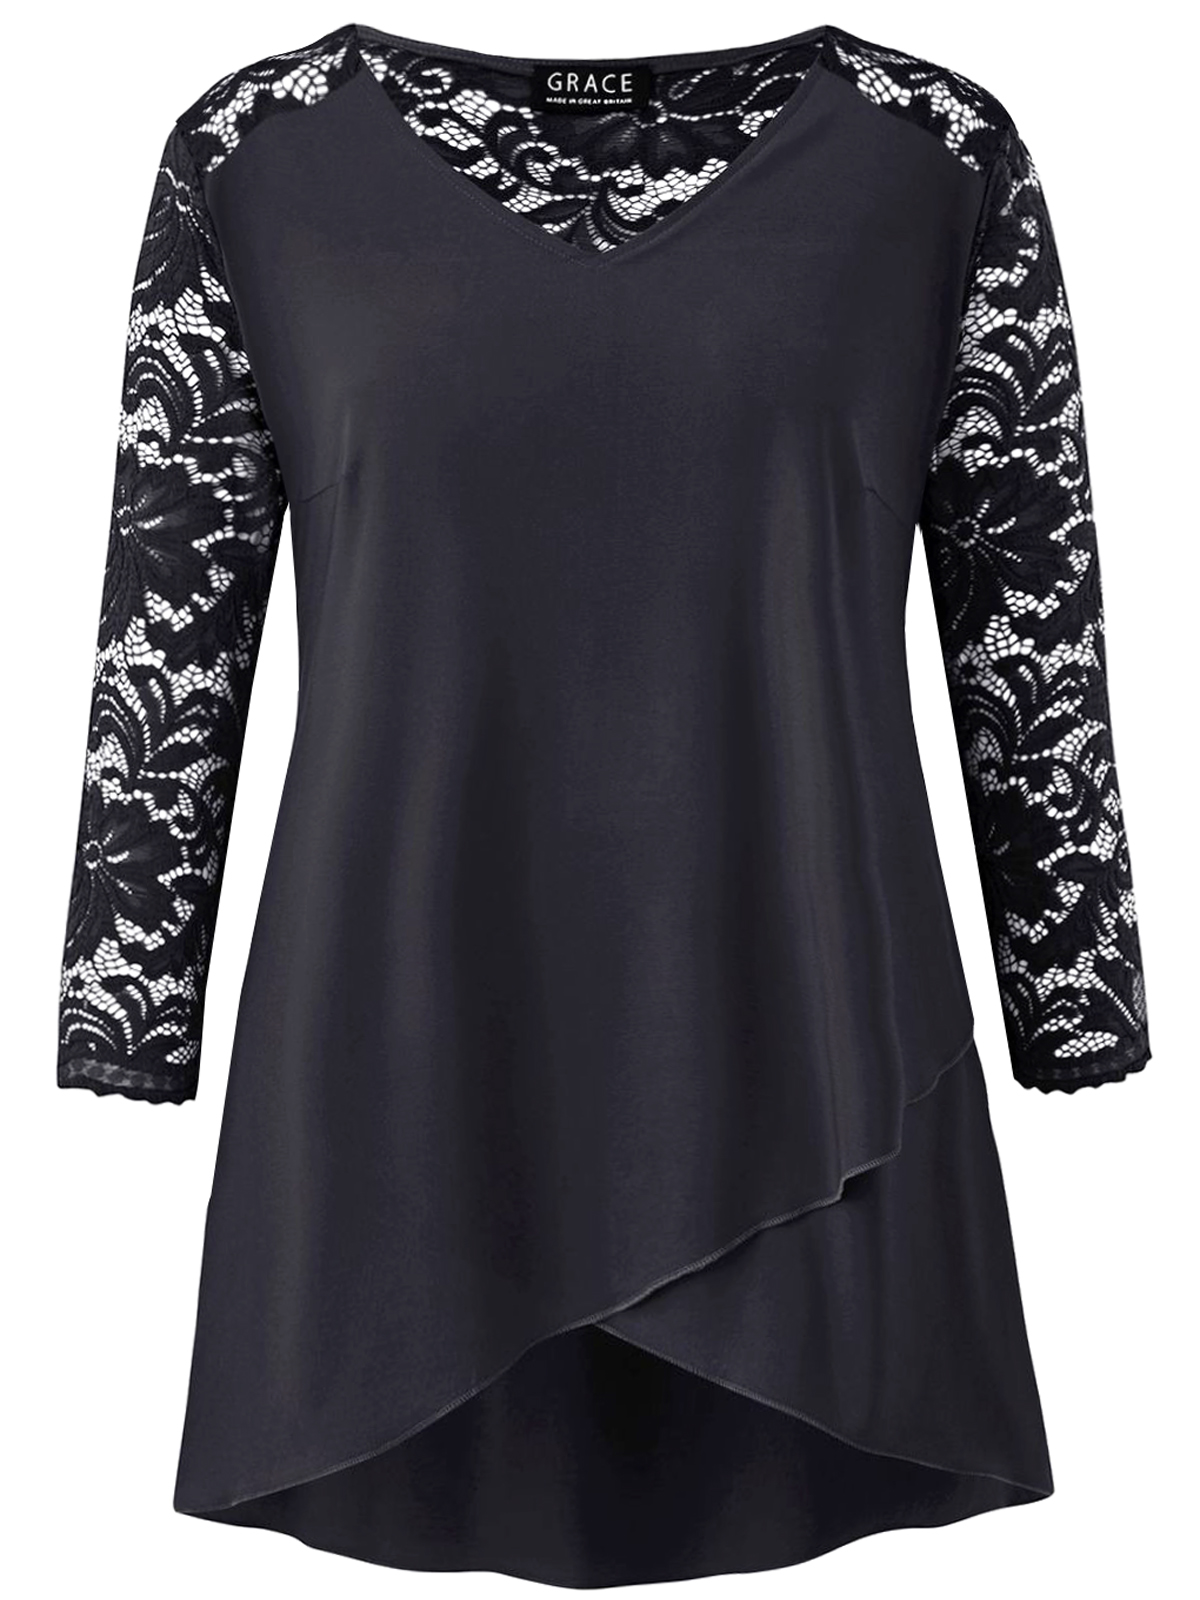 Grace (Made In Britain) - - Grace BLACK Lace Sleeve Tunic Top - Size 8 ...